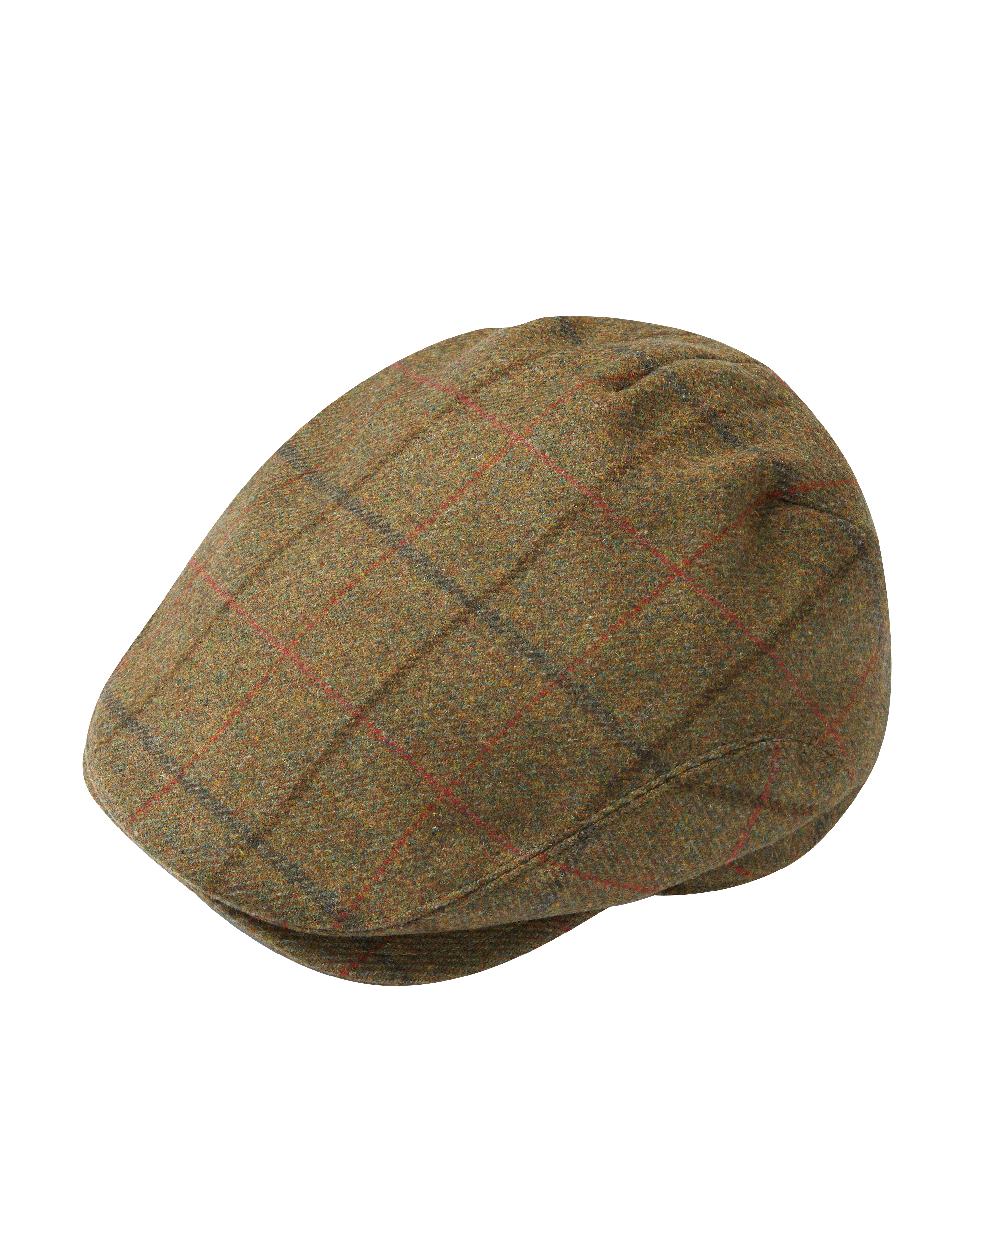 Alan Paine Combrook Extended Peak Cap in Thyme 